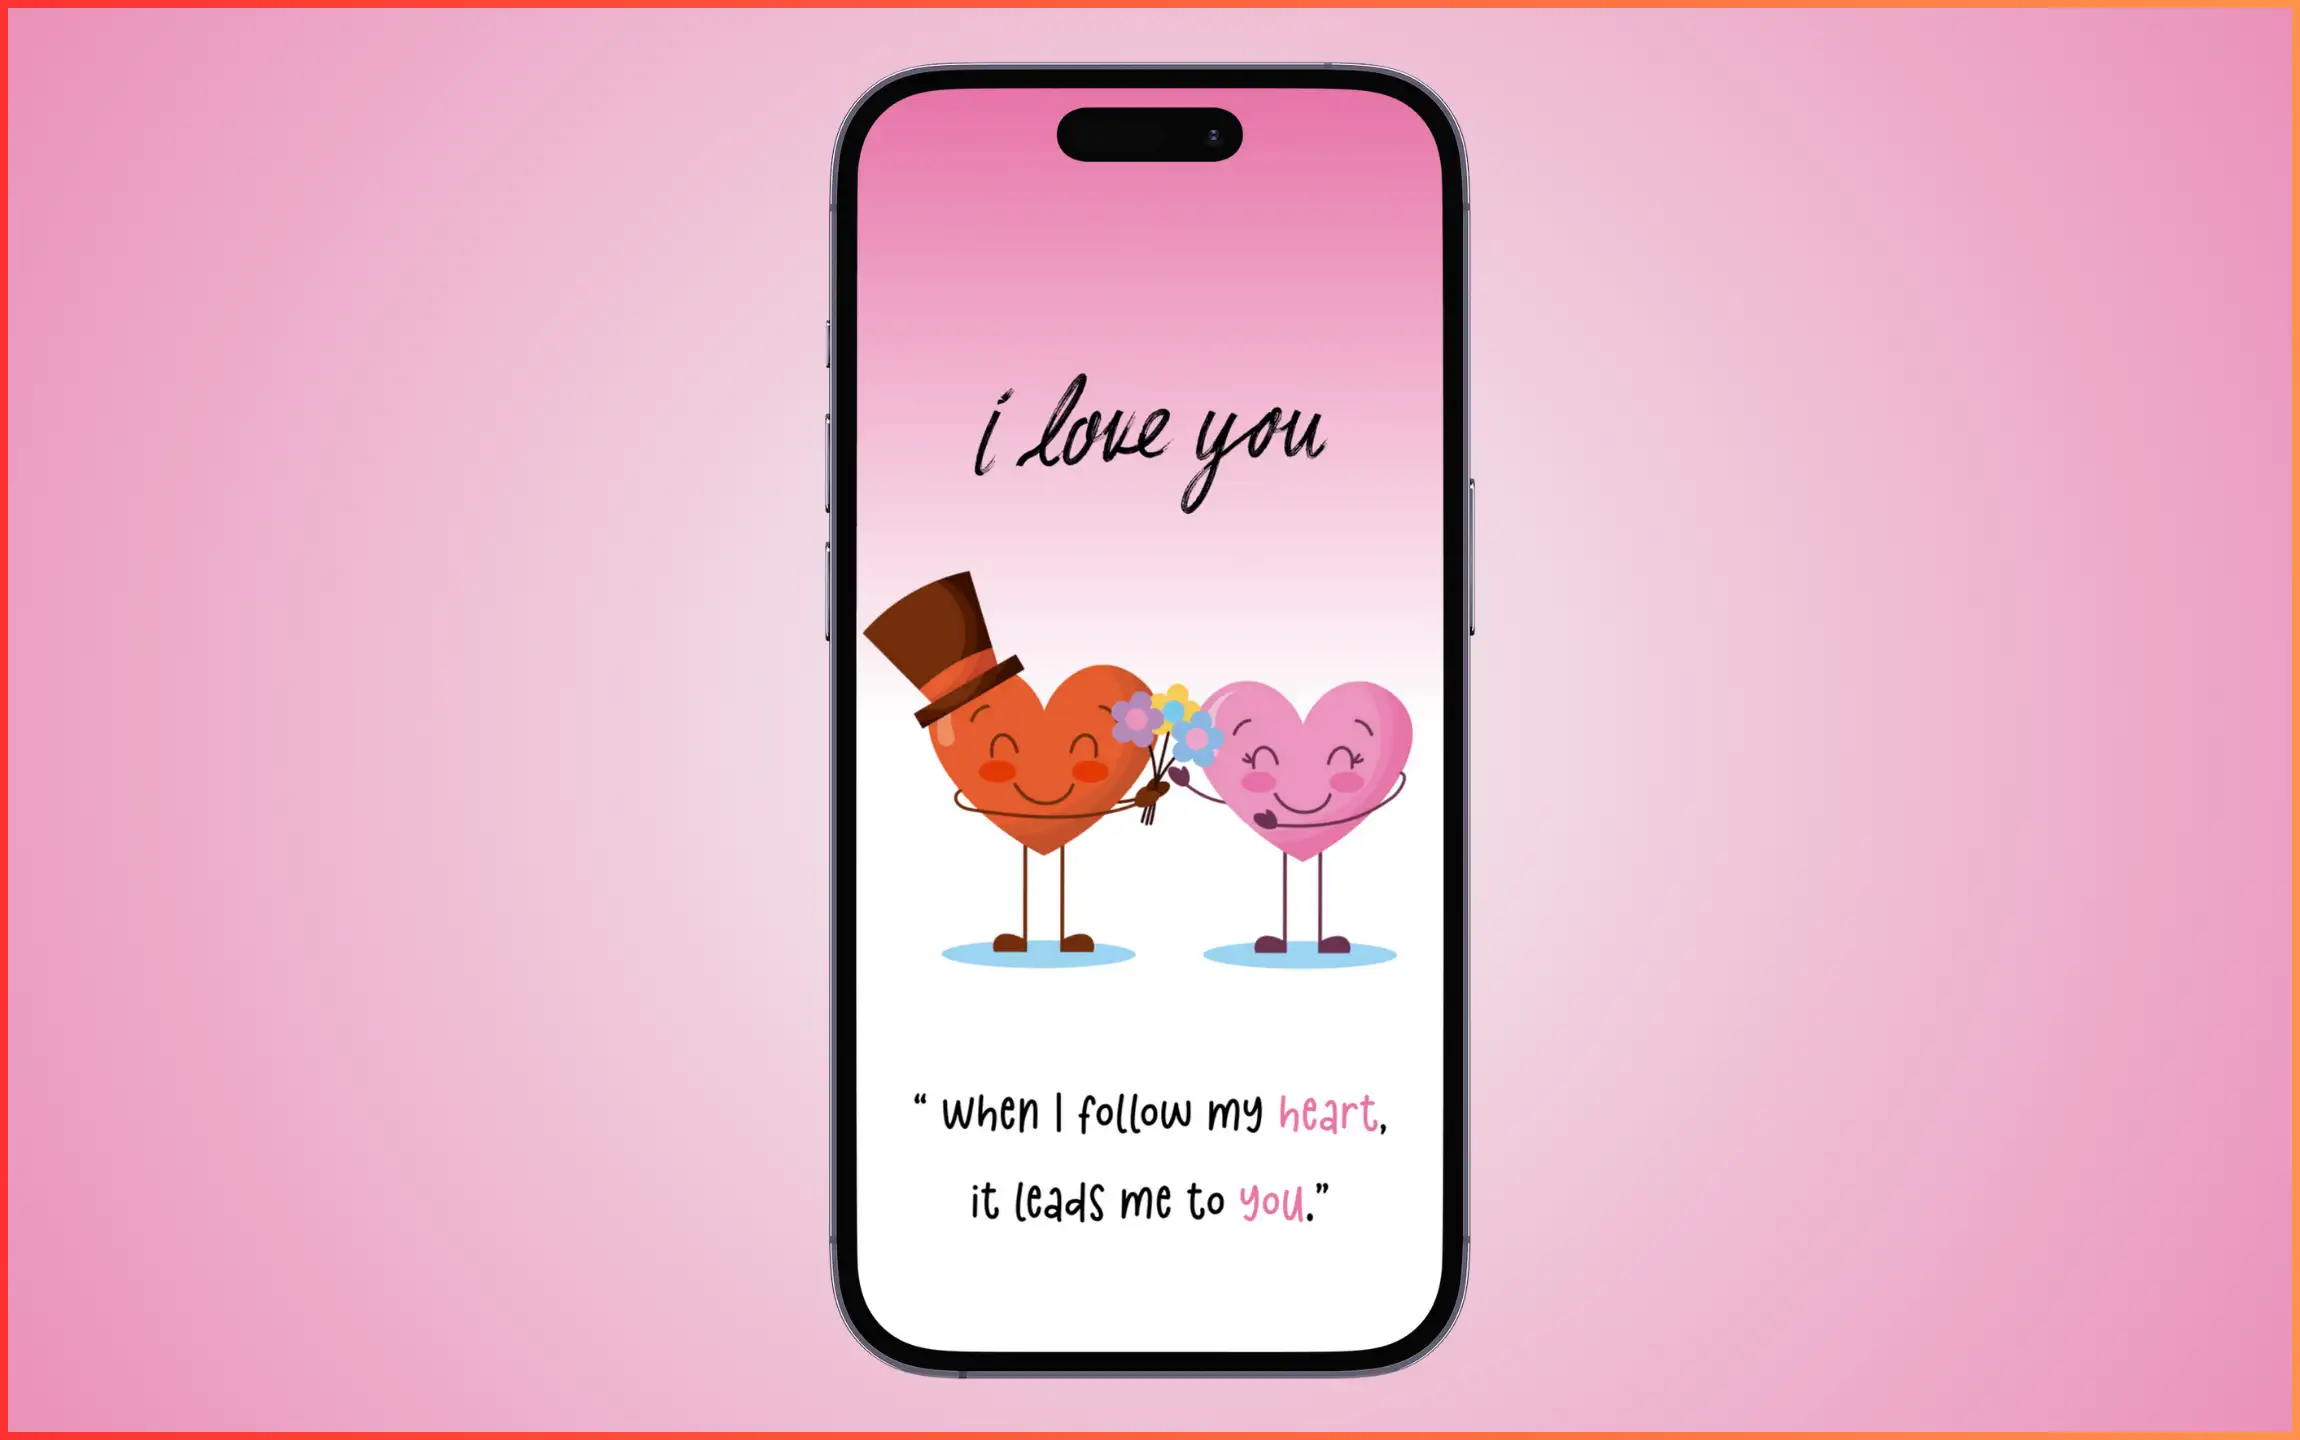 Beautiful valentine wallpaper for iPhone